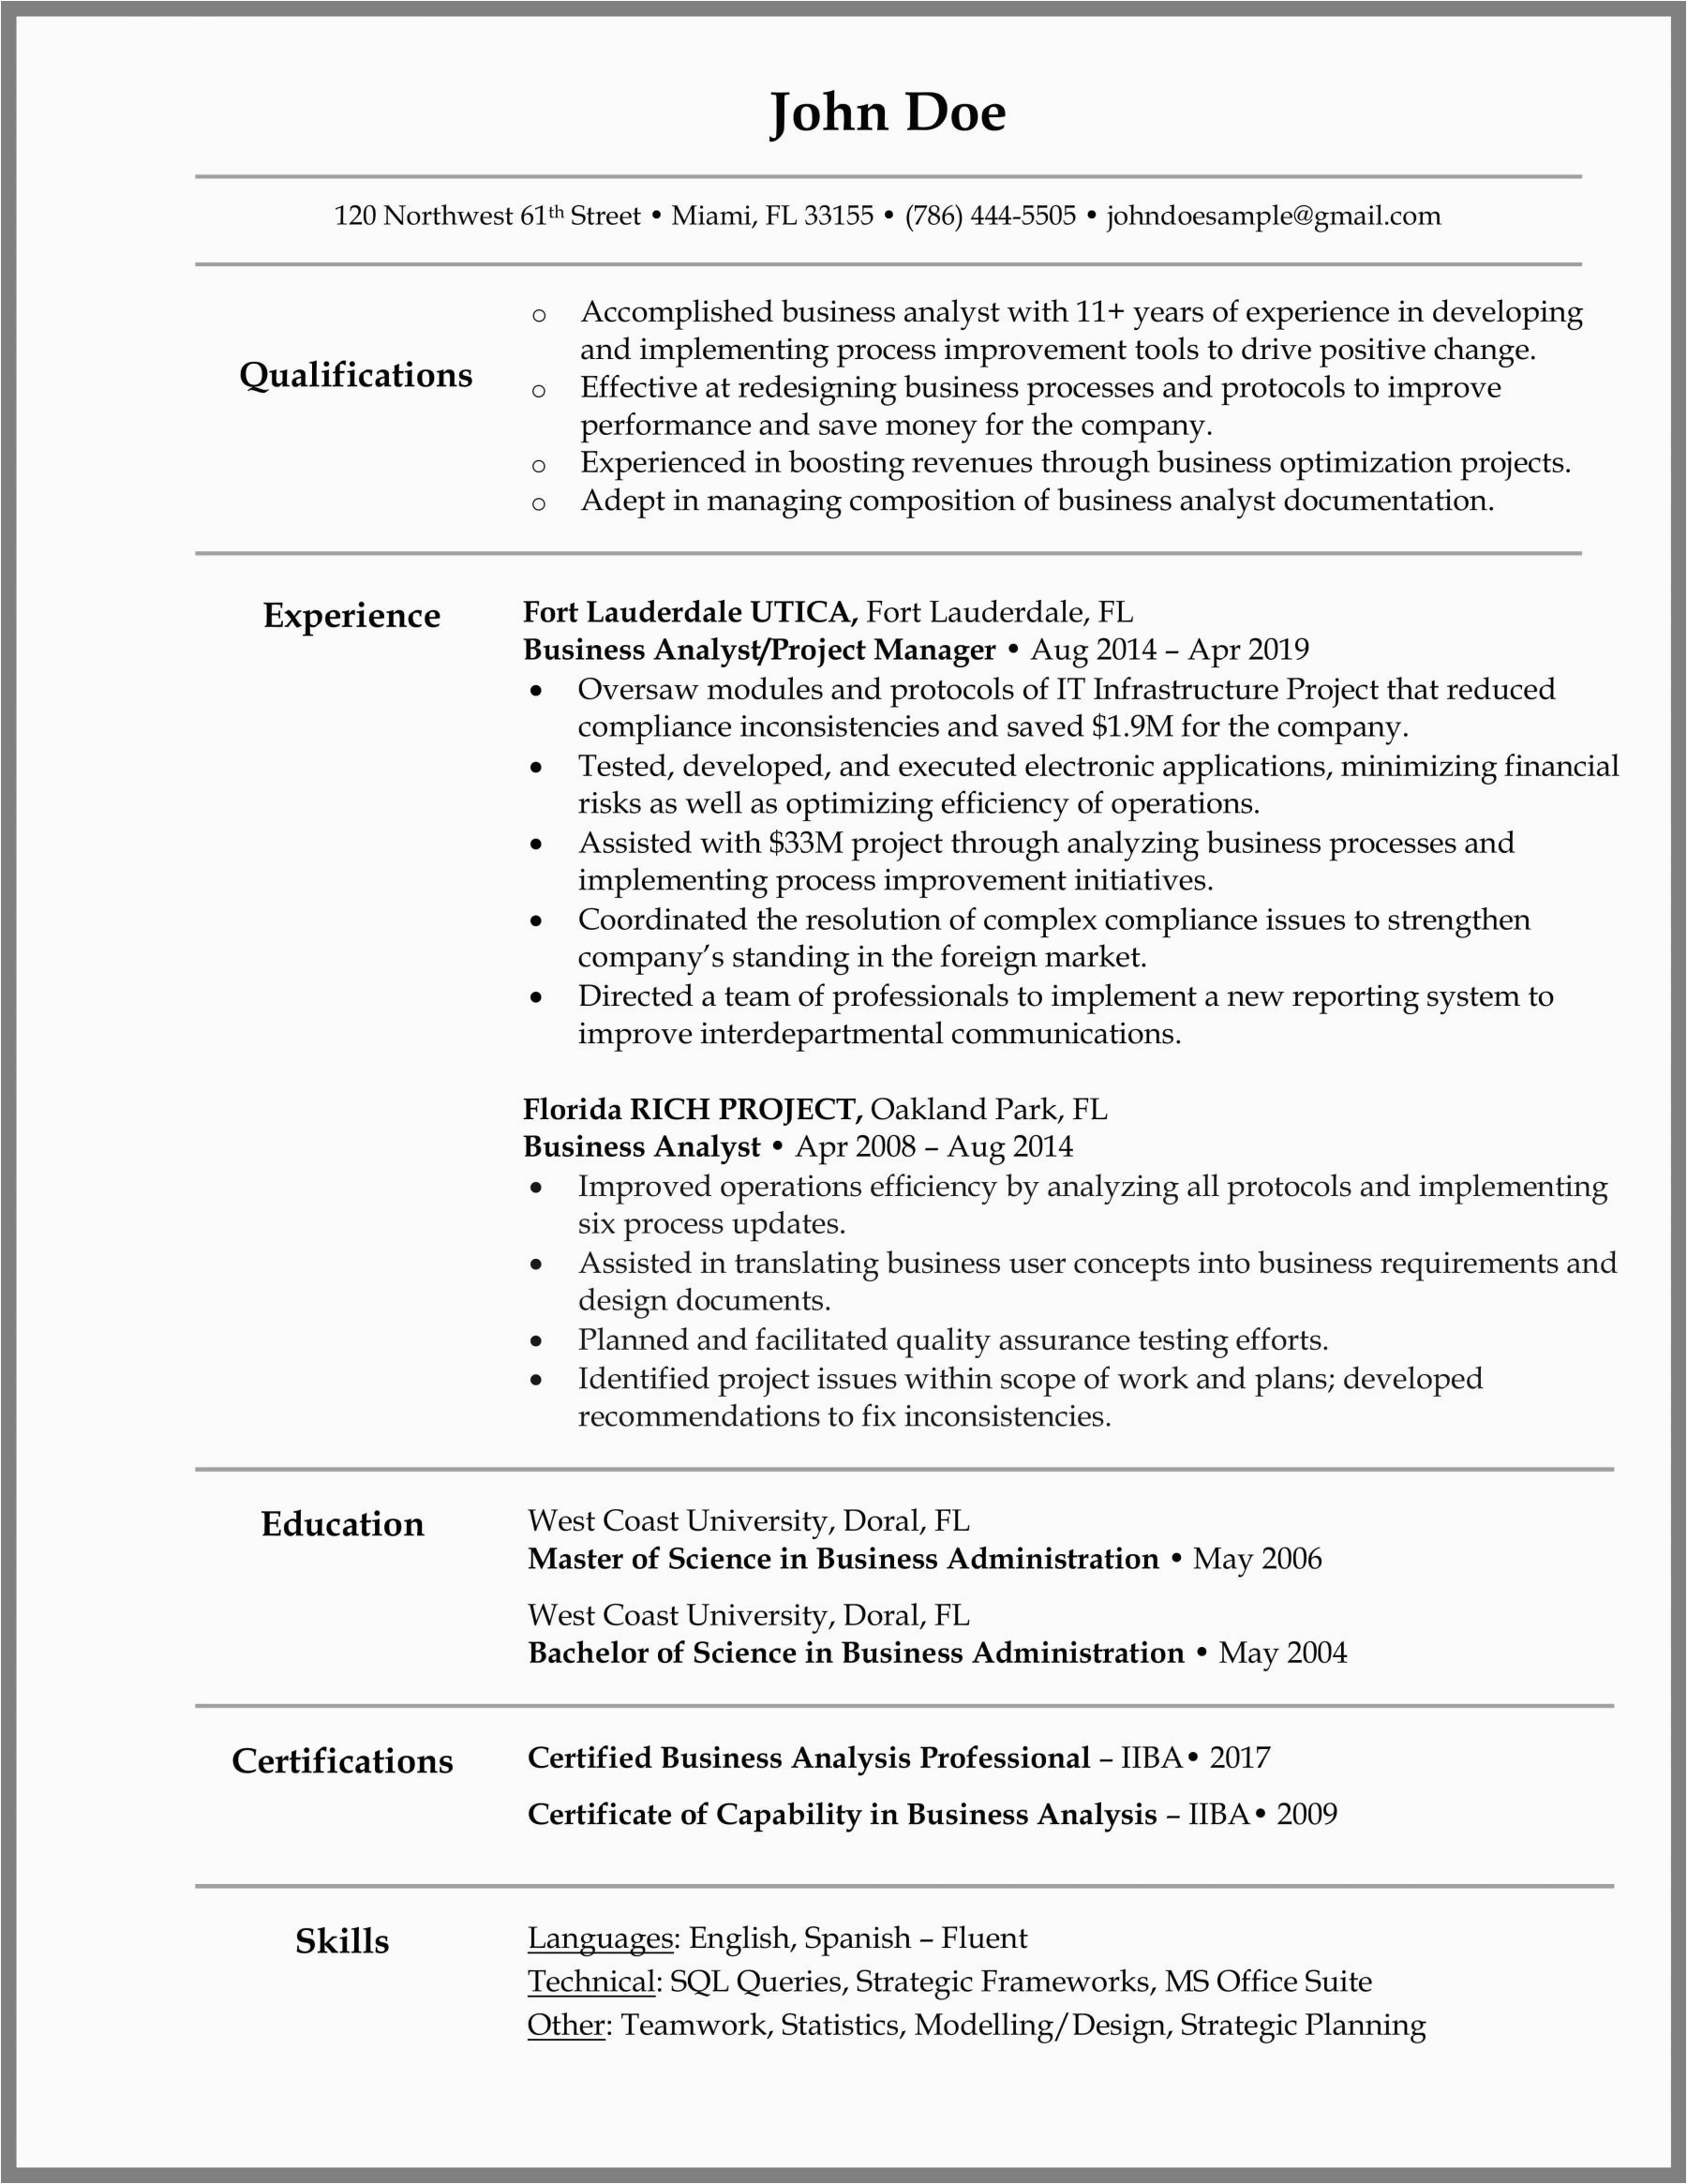 Sample Resume for It Business Analyst Position Business Analyst Resume